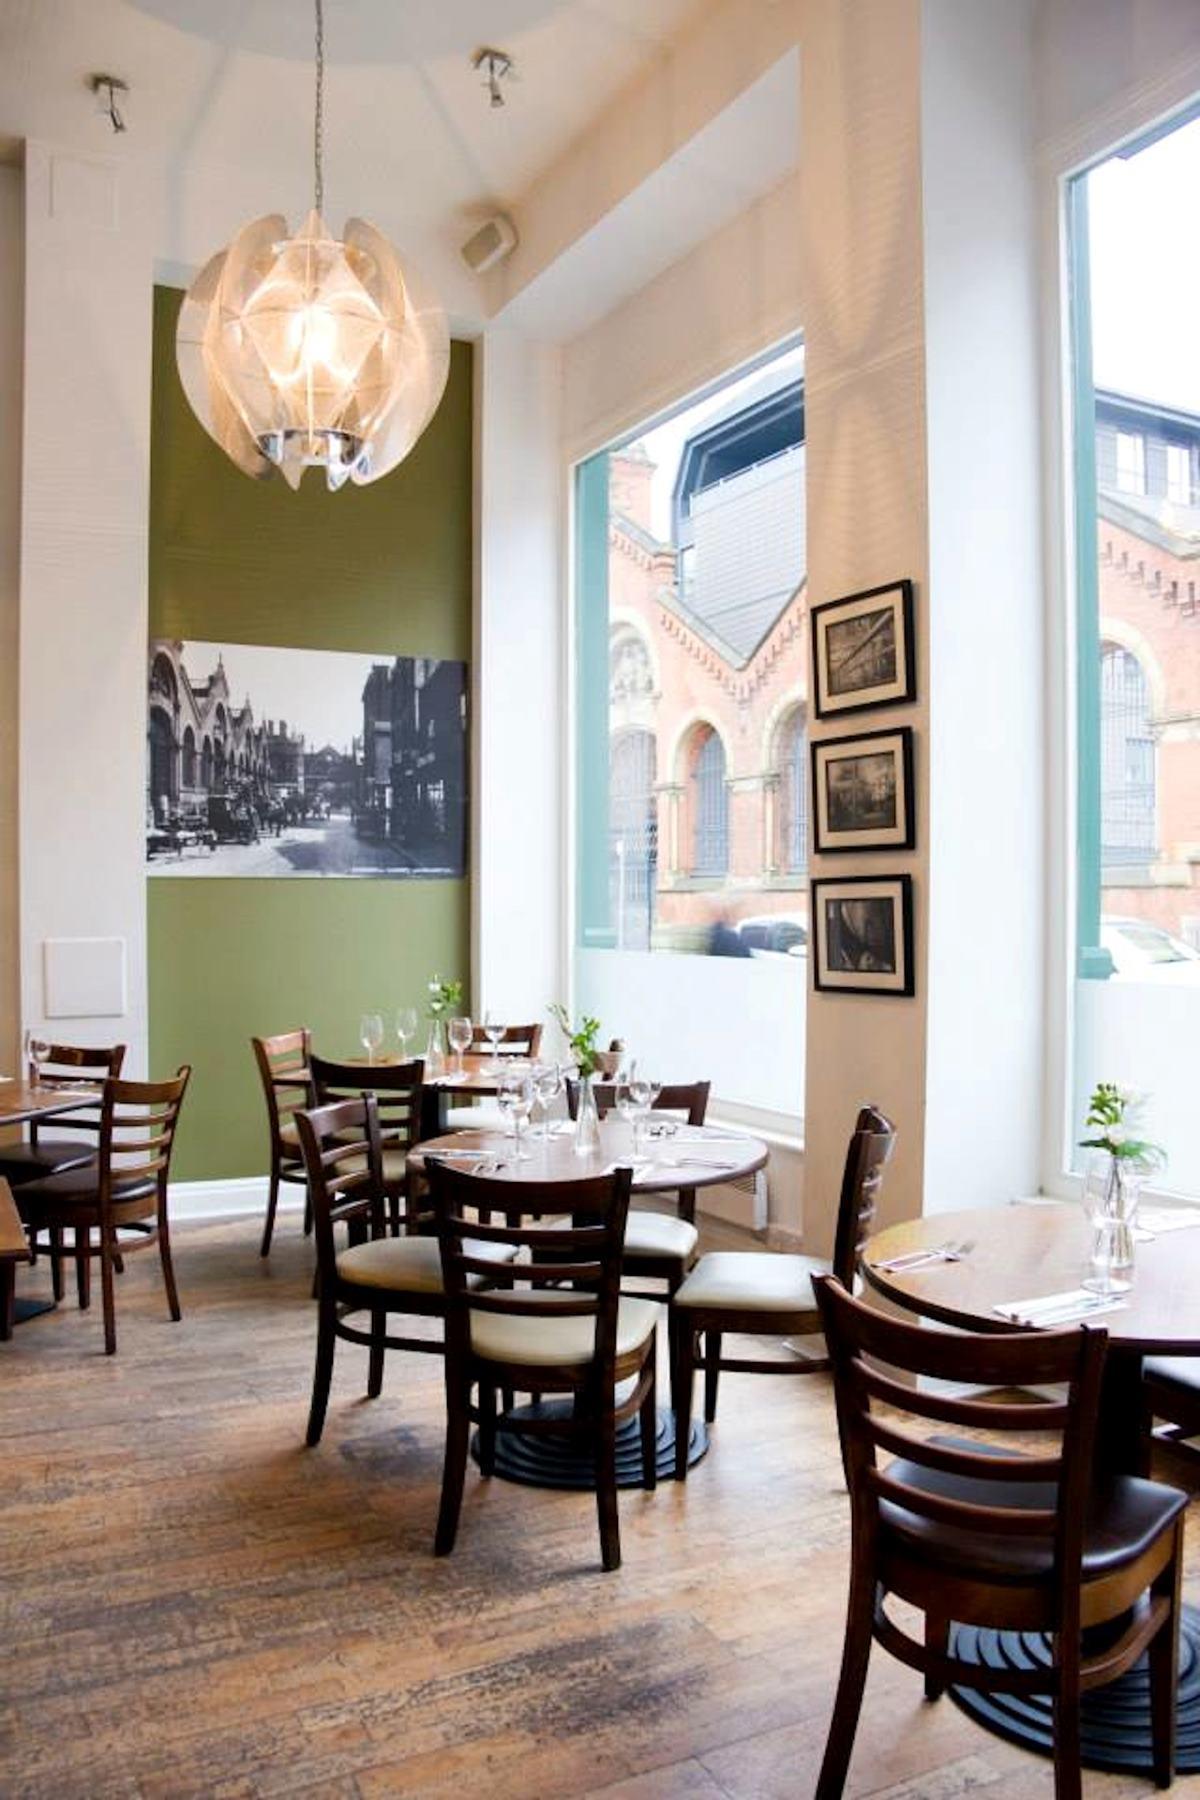 Exclusive Hire, The Northern Quarter Restaurant And Bar photo #1